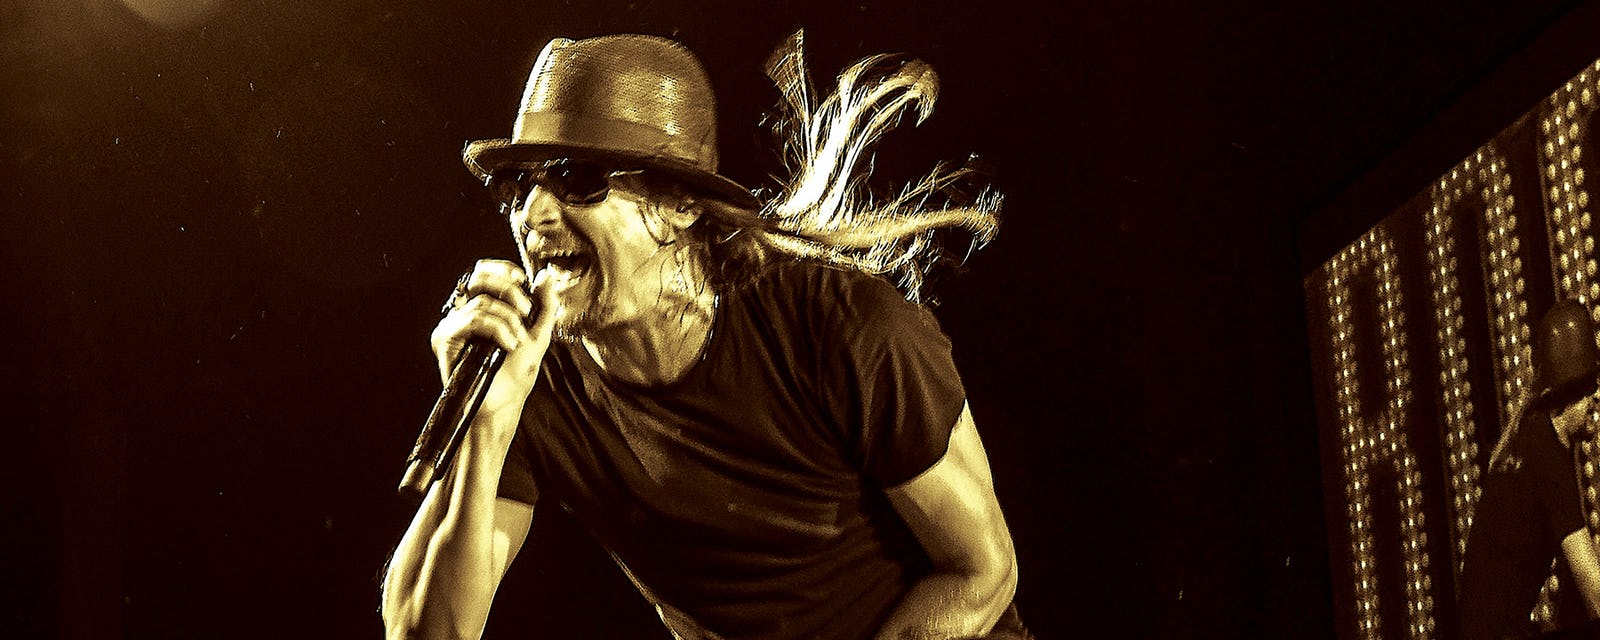 Kid Rock at Laughlin Event Center